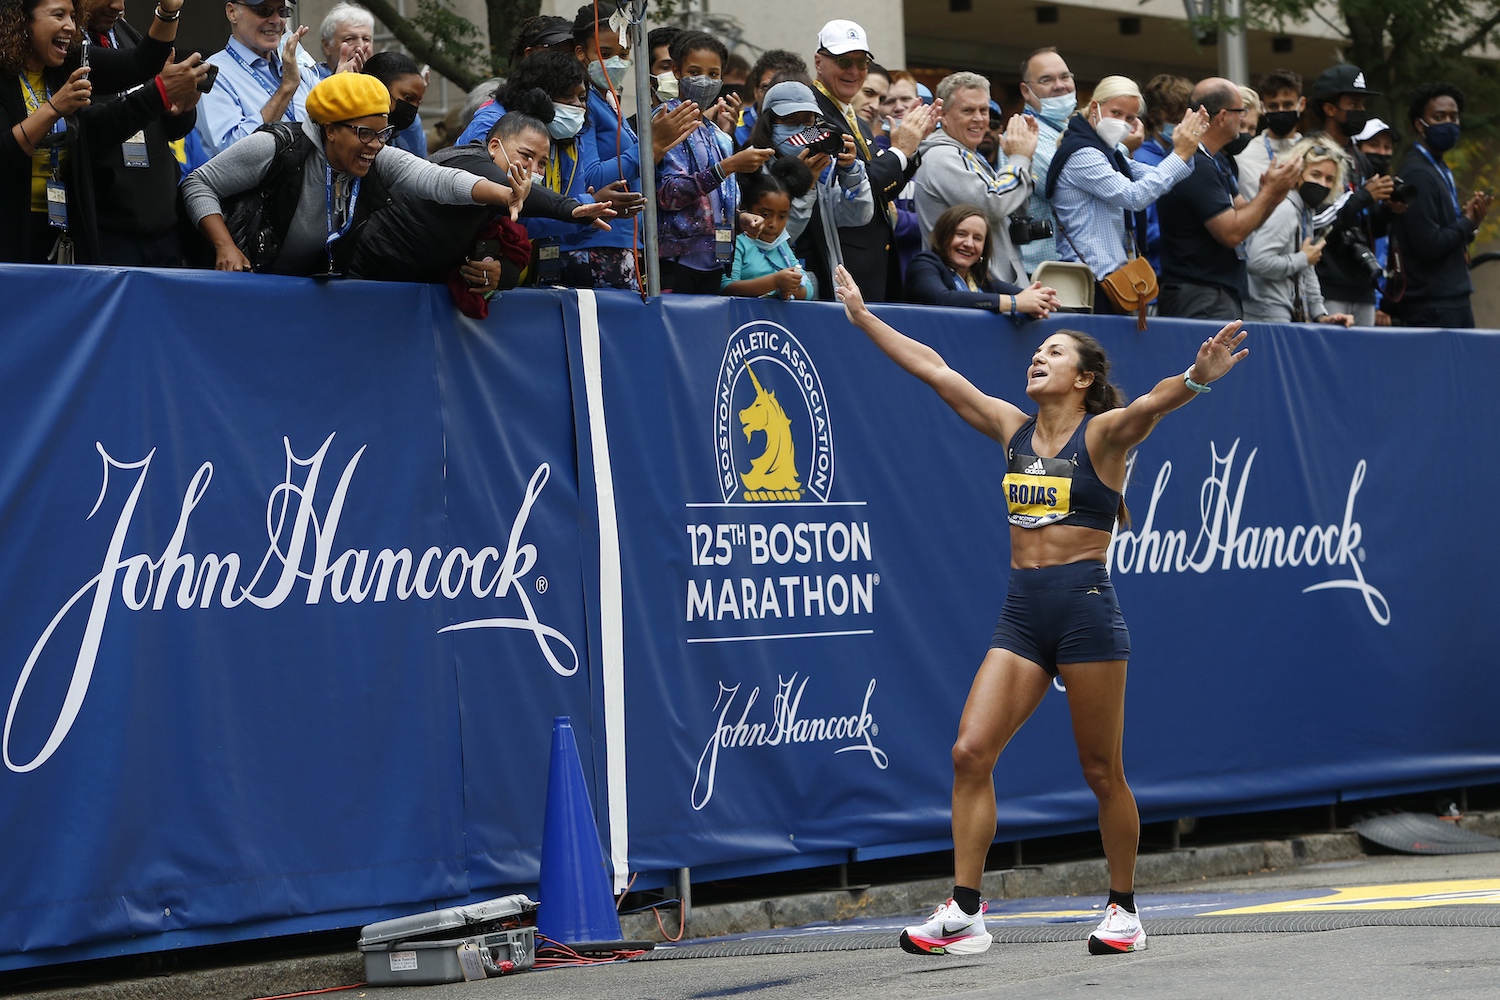 A top finisher at the Boston Marathon is cheered by fans in the stands behind her.